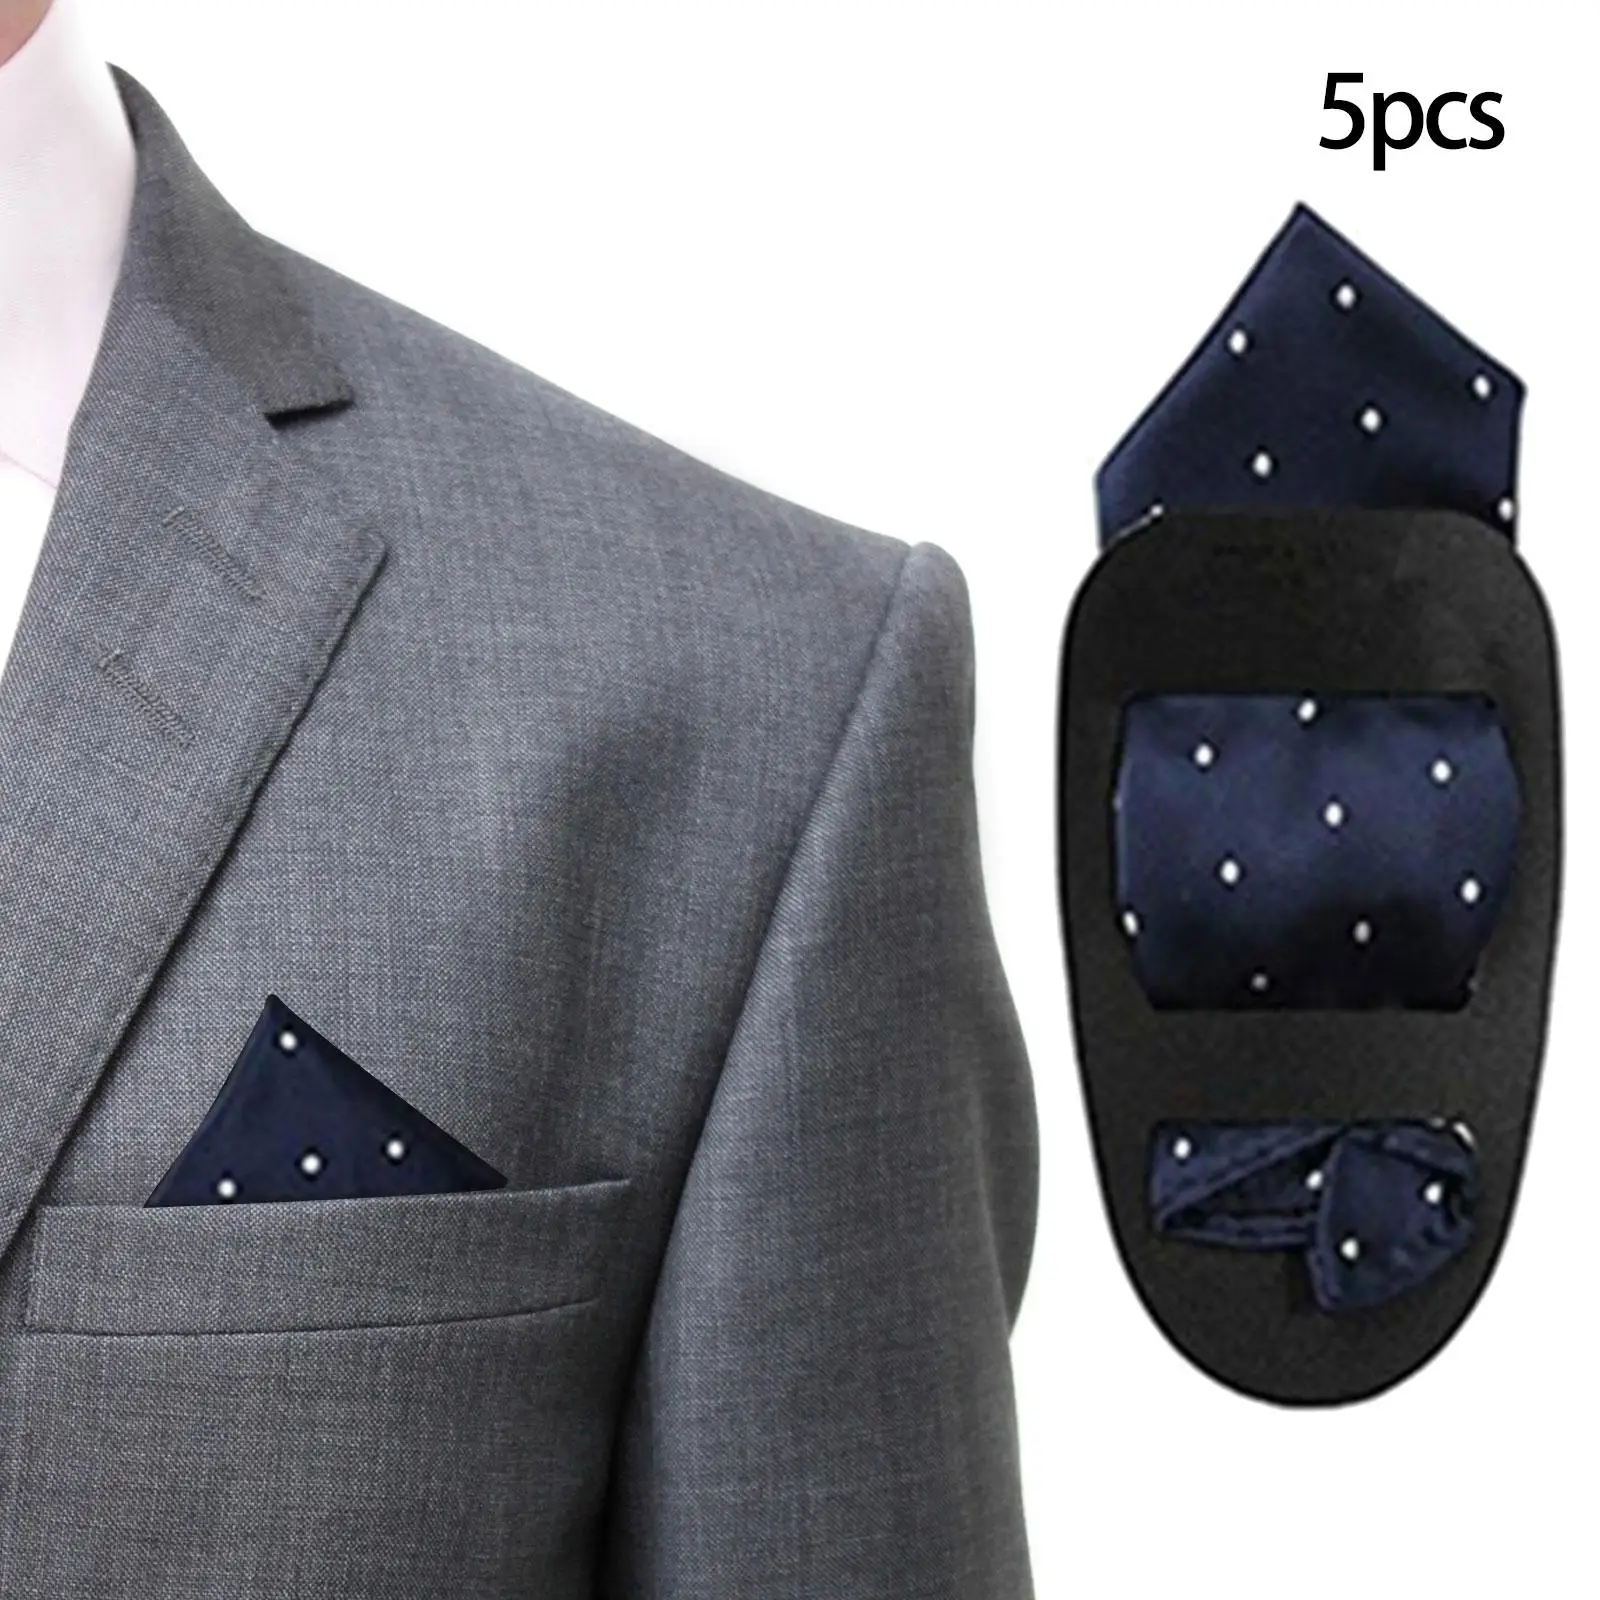 5x Pocket Square Holder Fixing Bracket for MenS suits Accessories Tuxedos